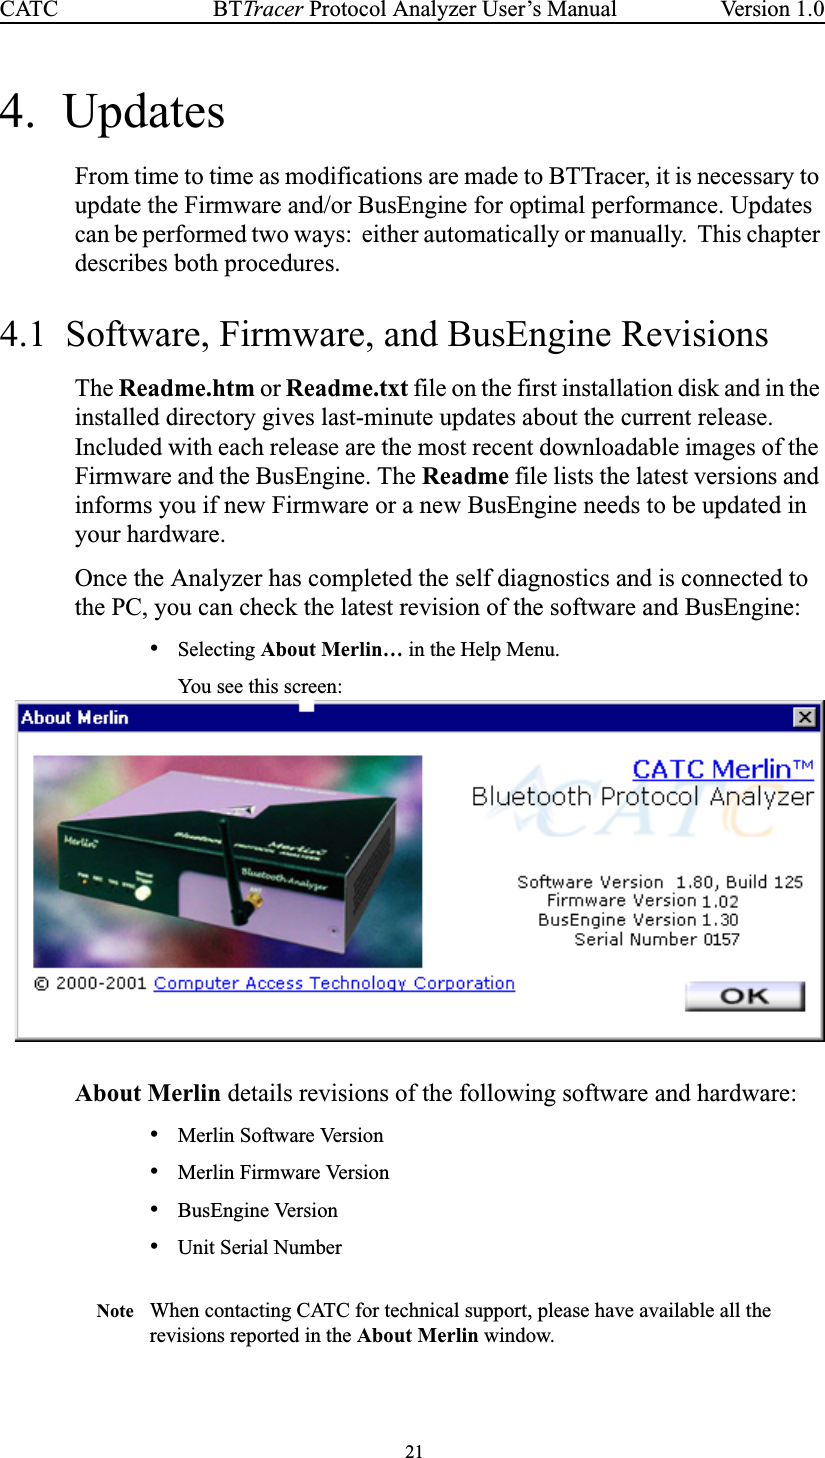 21BTTracer Protocol Analyzer User’s ManualCATC Version 1.04. UpdatesFrom time to time as modifications are made to BTTracer, it is necessary toupdate the Firmware and/or BusEngine for optimal performance. Updatescan be performed two ways: either automatically or manually. This chapterdescribes both procedures.4.1 Software, Firmware, and BusEngine RevisionsThe Readme.htm or Readme.txt file on the first installation disk and in theinstalled directory gives last-minute updates about the current release.Included with each release are the most recent downloadable images of theFirmware and the BusEngine. The Readme file lists the latest versions andinforms you if new Firmware or a new BusEngine needs to be updated inyour hardware.Once the Analyzer has completed the self diagnostics and is connected tothe PC, you can check the latest revision of the software and BusEngine:•Selecting About Merlin… in the Help Menu.You see this screen:About Merlin details revisions of the following software and hardware:•Merlin Software Version•Merlin Firmware Version•BusEngine Version•Unit Serial NumberNote When contacting CATC for technical support, please have available all therevisions reported in the About Merlin window.